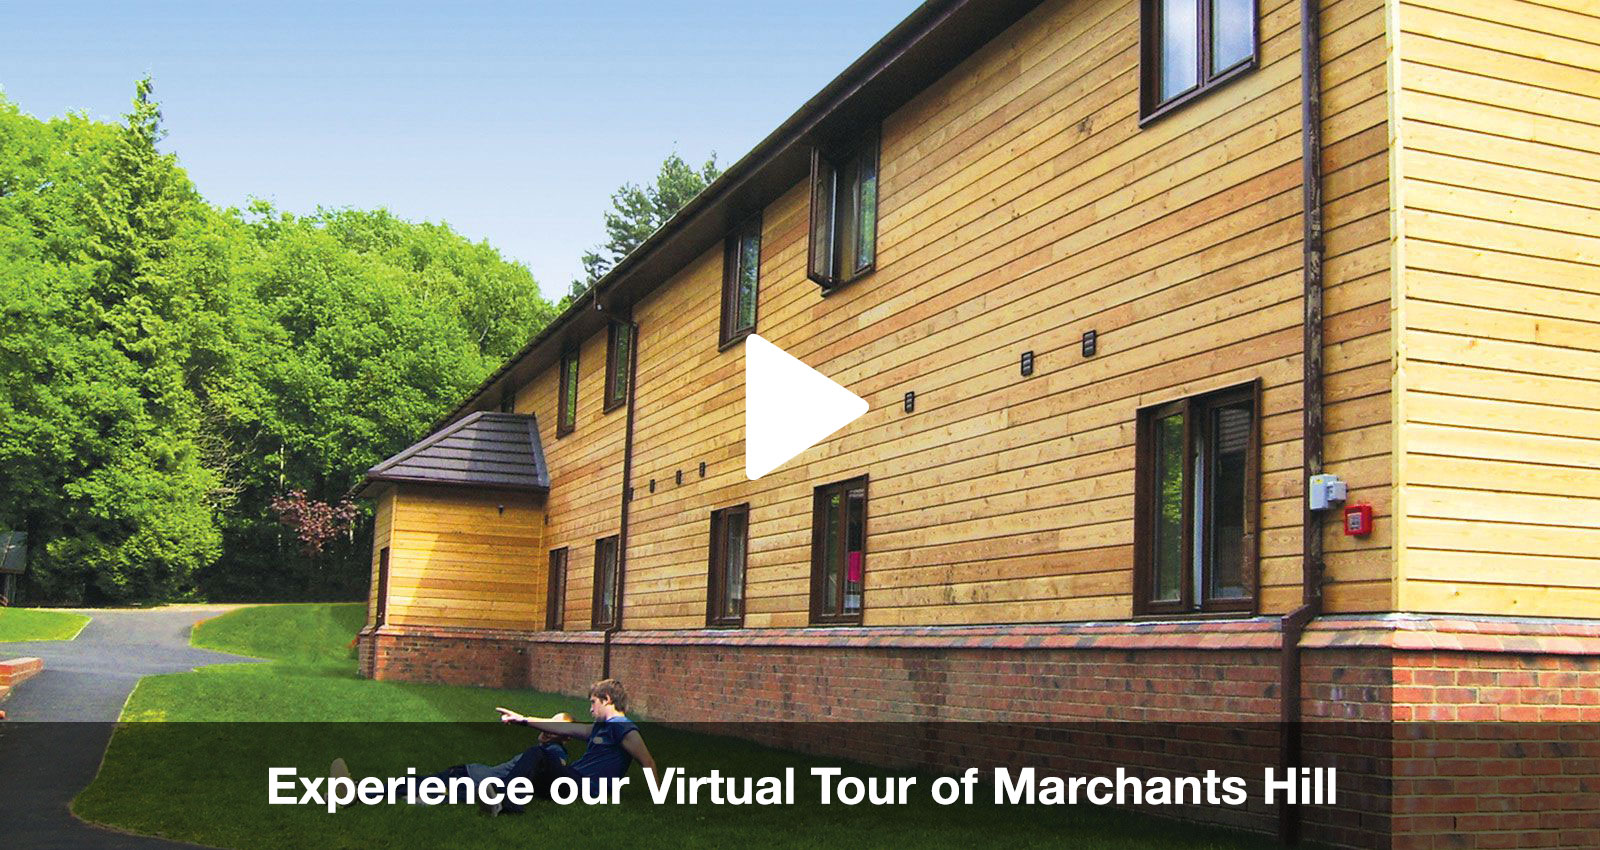 Marchants Hill for International Students